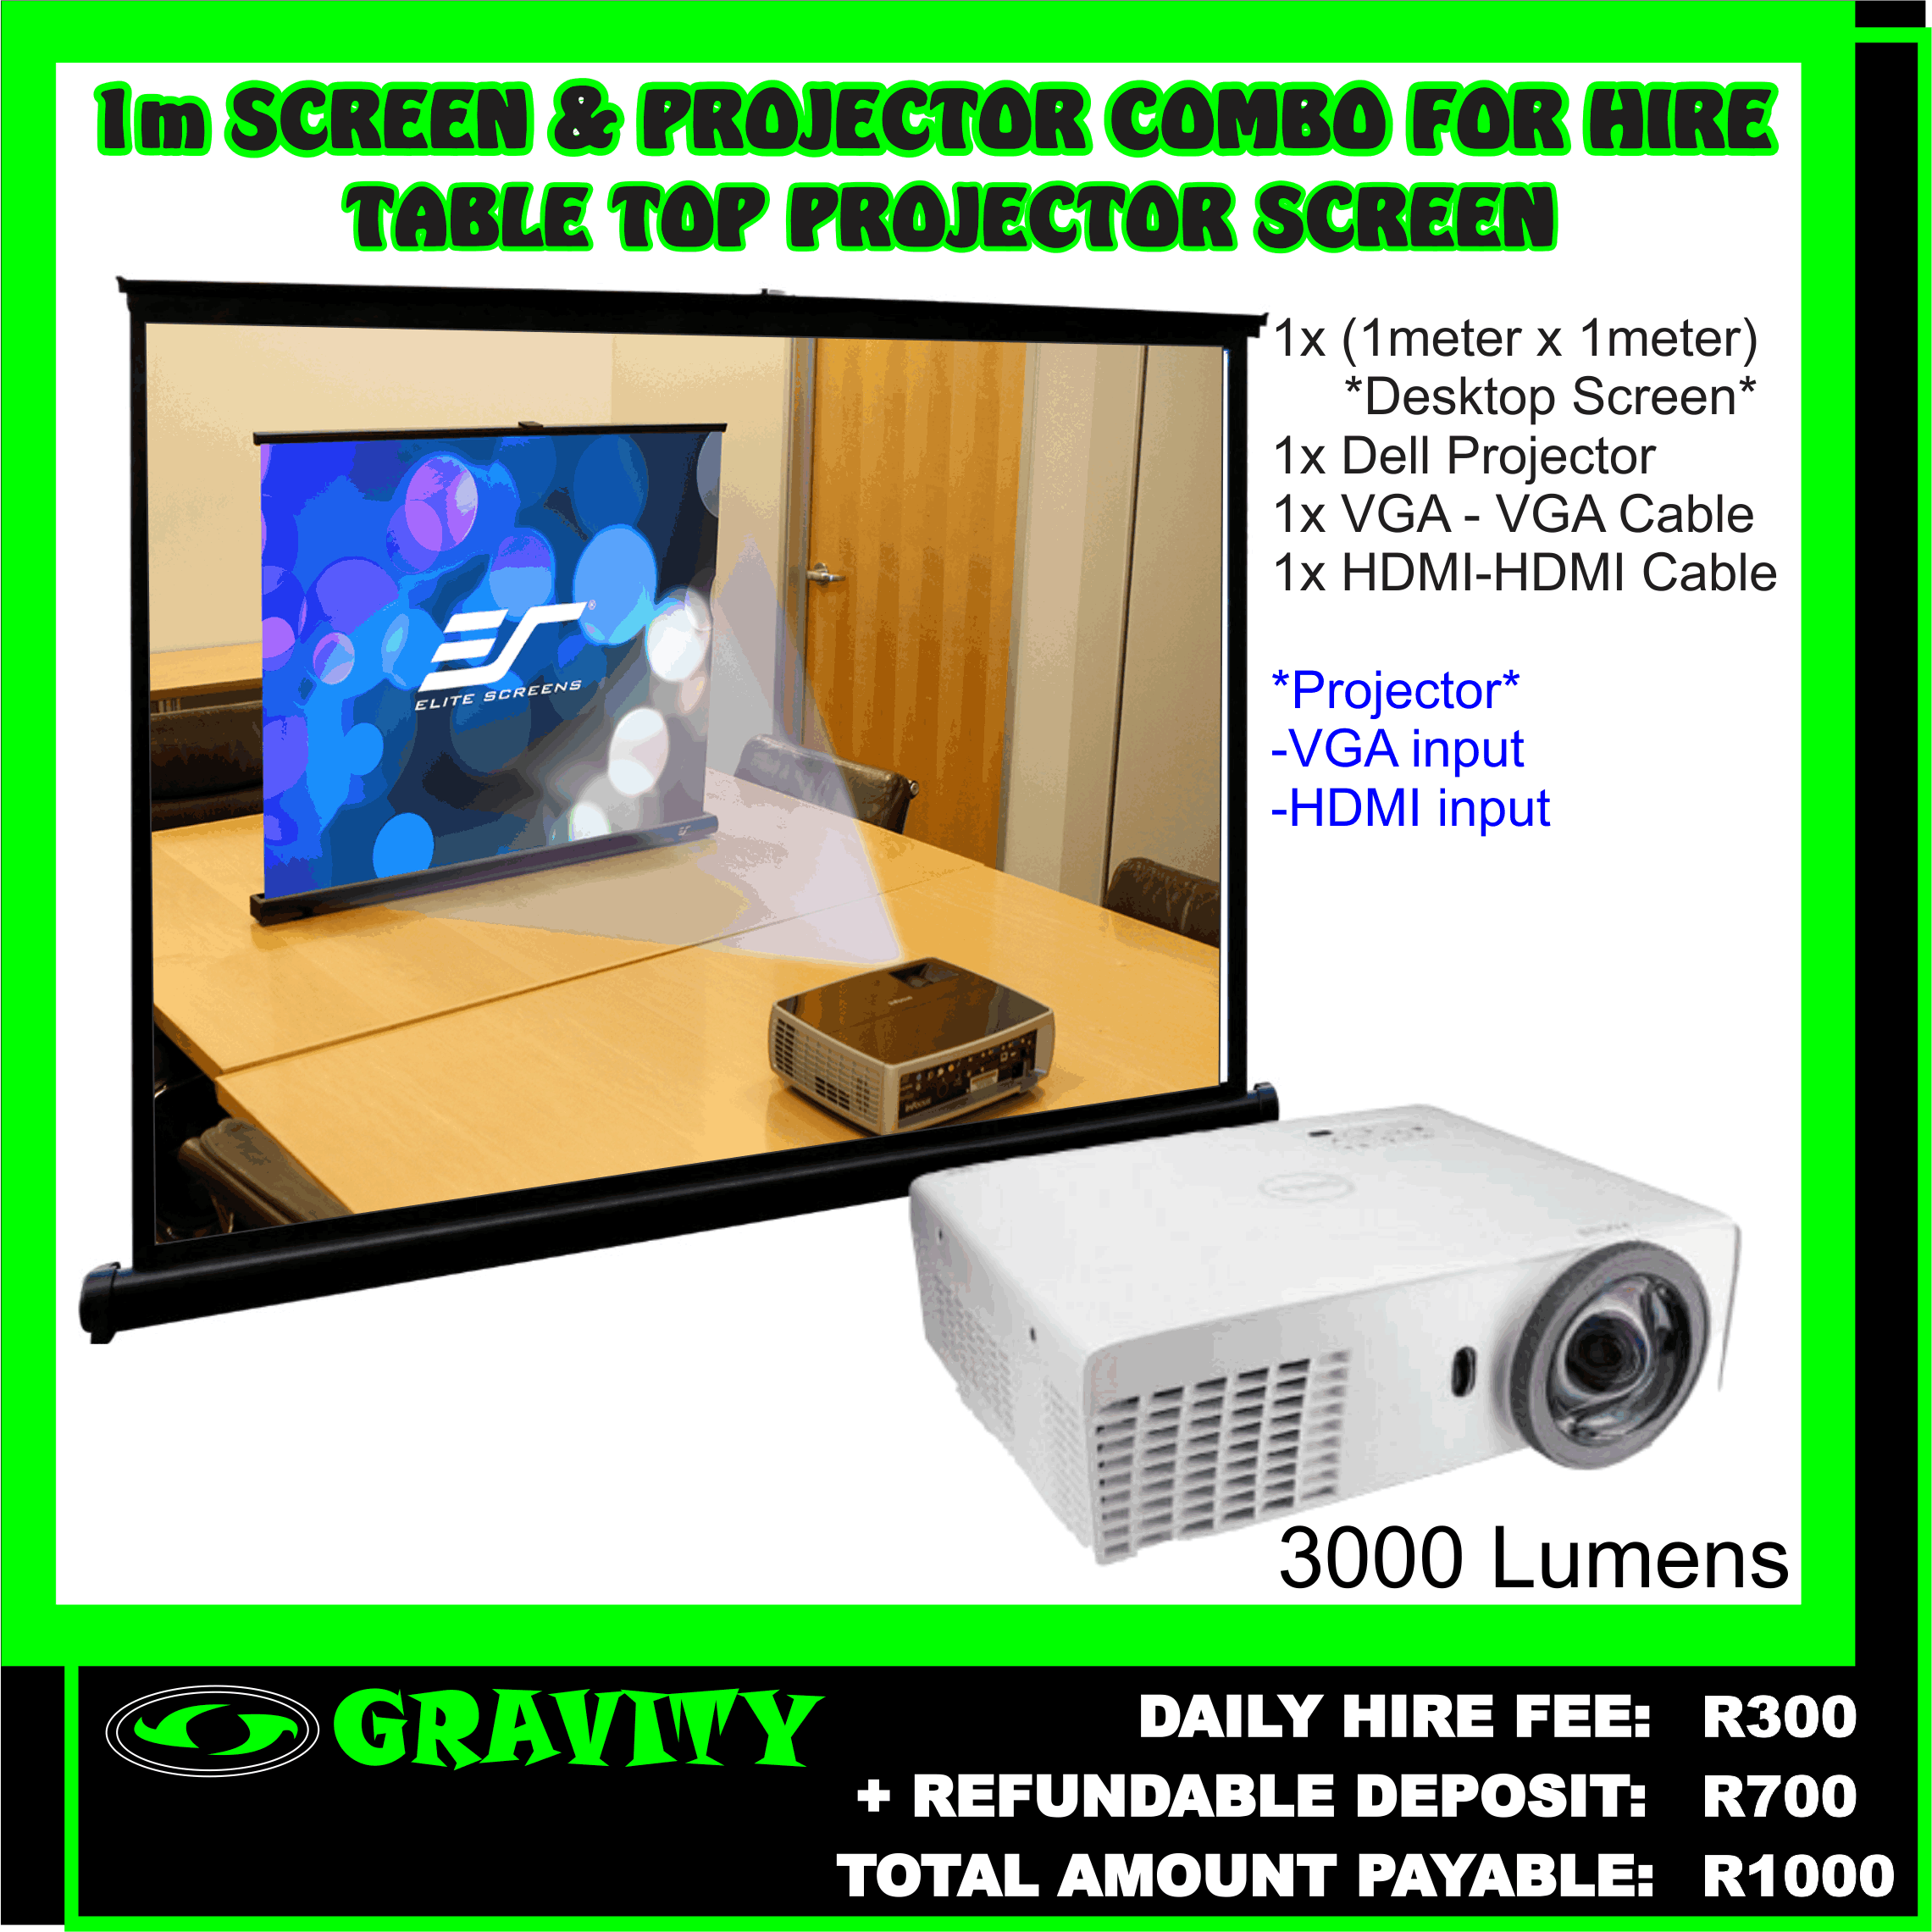 1.5m PROJECTOR SCREEN AND PROJECTOR COMBO FOR HIRE IN DURBAN AREA NOW AVAILABLE ON DAILY HIRE AT GRAVITY SOUND AND LIGHTING WAREHOUSE DURBAN PHOENIX 0315072463  OR 0315072736  DAILY HIRE FEE: R850  PROJECTOR +  1.5m PROJECTOR SCREEN  +  AND PROJECTOR ACCESSORIES     DOCUMENTS REQUIRED WHEN HIRING EQUIPMENT:  *COPY OF ID DOCUMENT (original SA id)  *CAR REGISTRATION NUMBER  *PROOF OF RESIDENCE (not older than 3months)